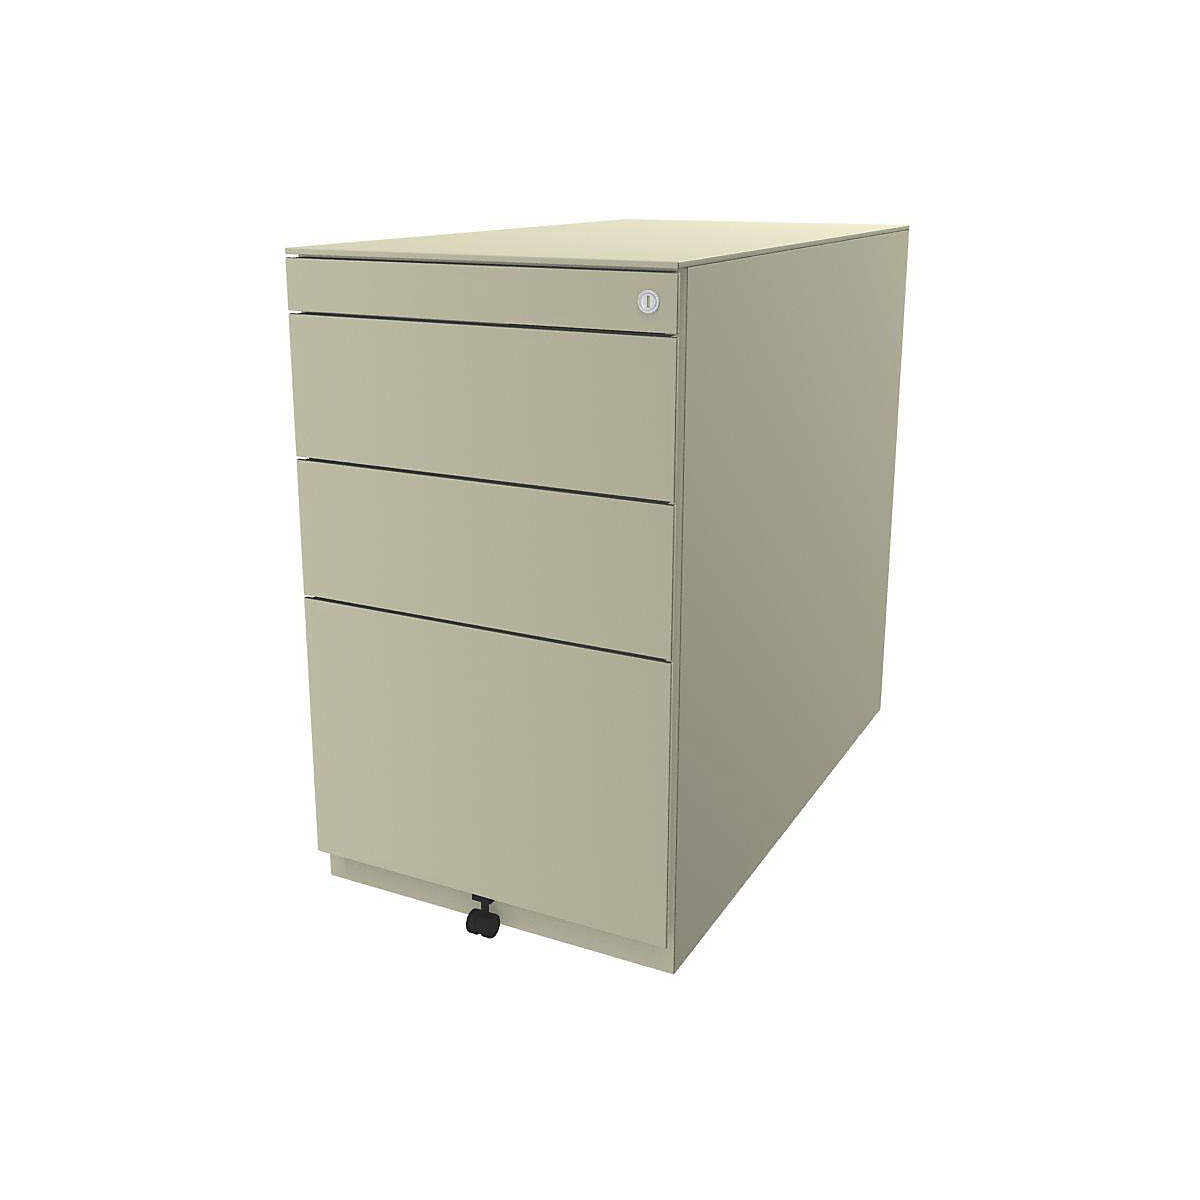 Note™ fixed pedestal, with 2 universal drawers, 1 suspension file drawer – BISLEY